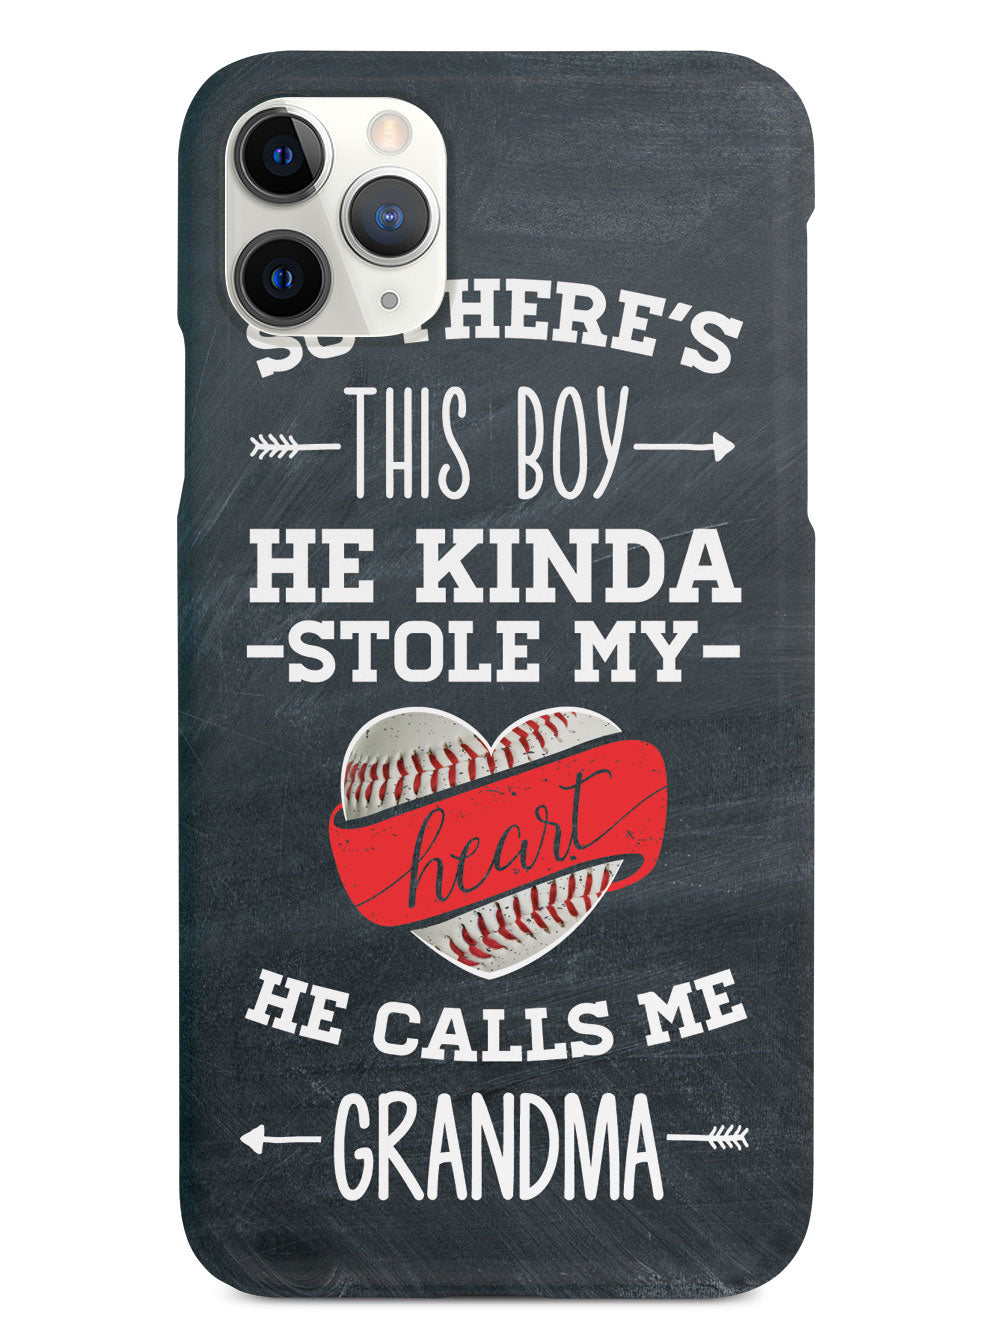 So There's This Boy... Baseball Player - Grandma Case